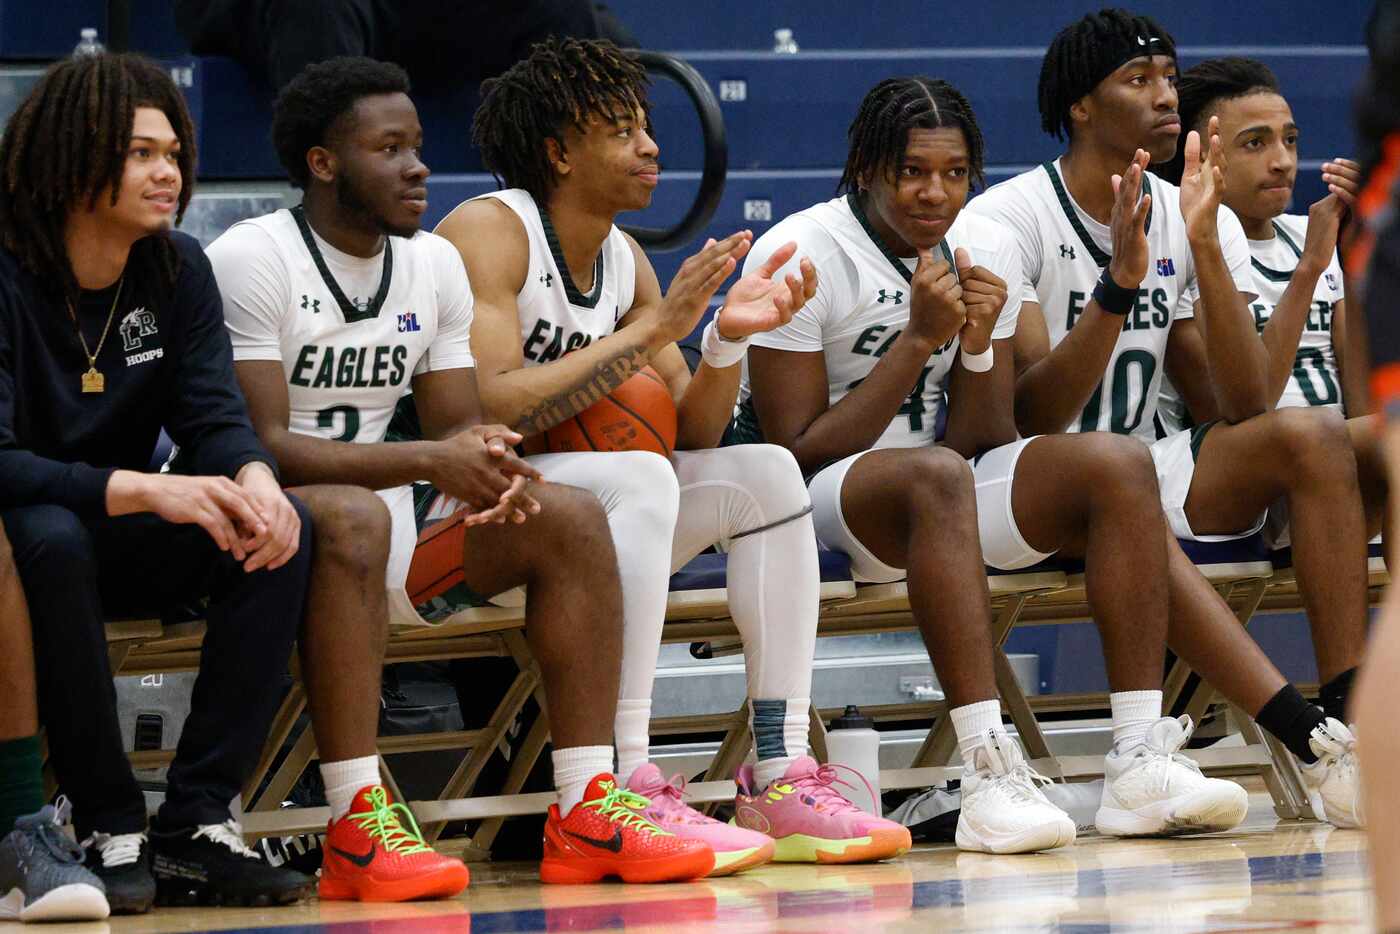 Mansfield Lake Ridge players clap after a three-pointer during the second half of a...